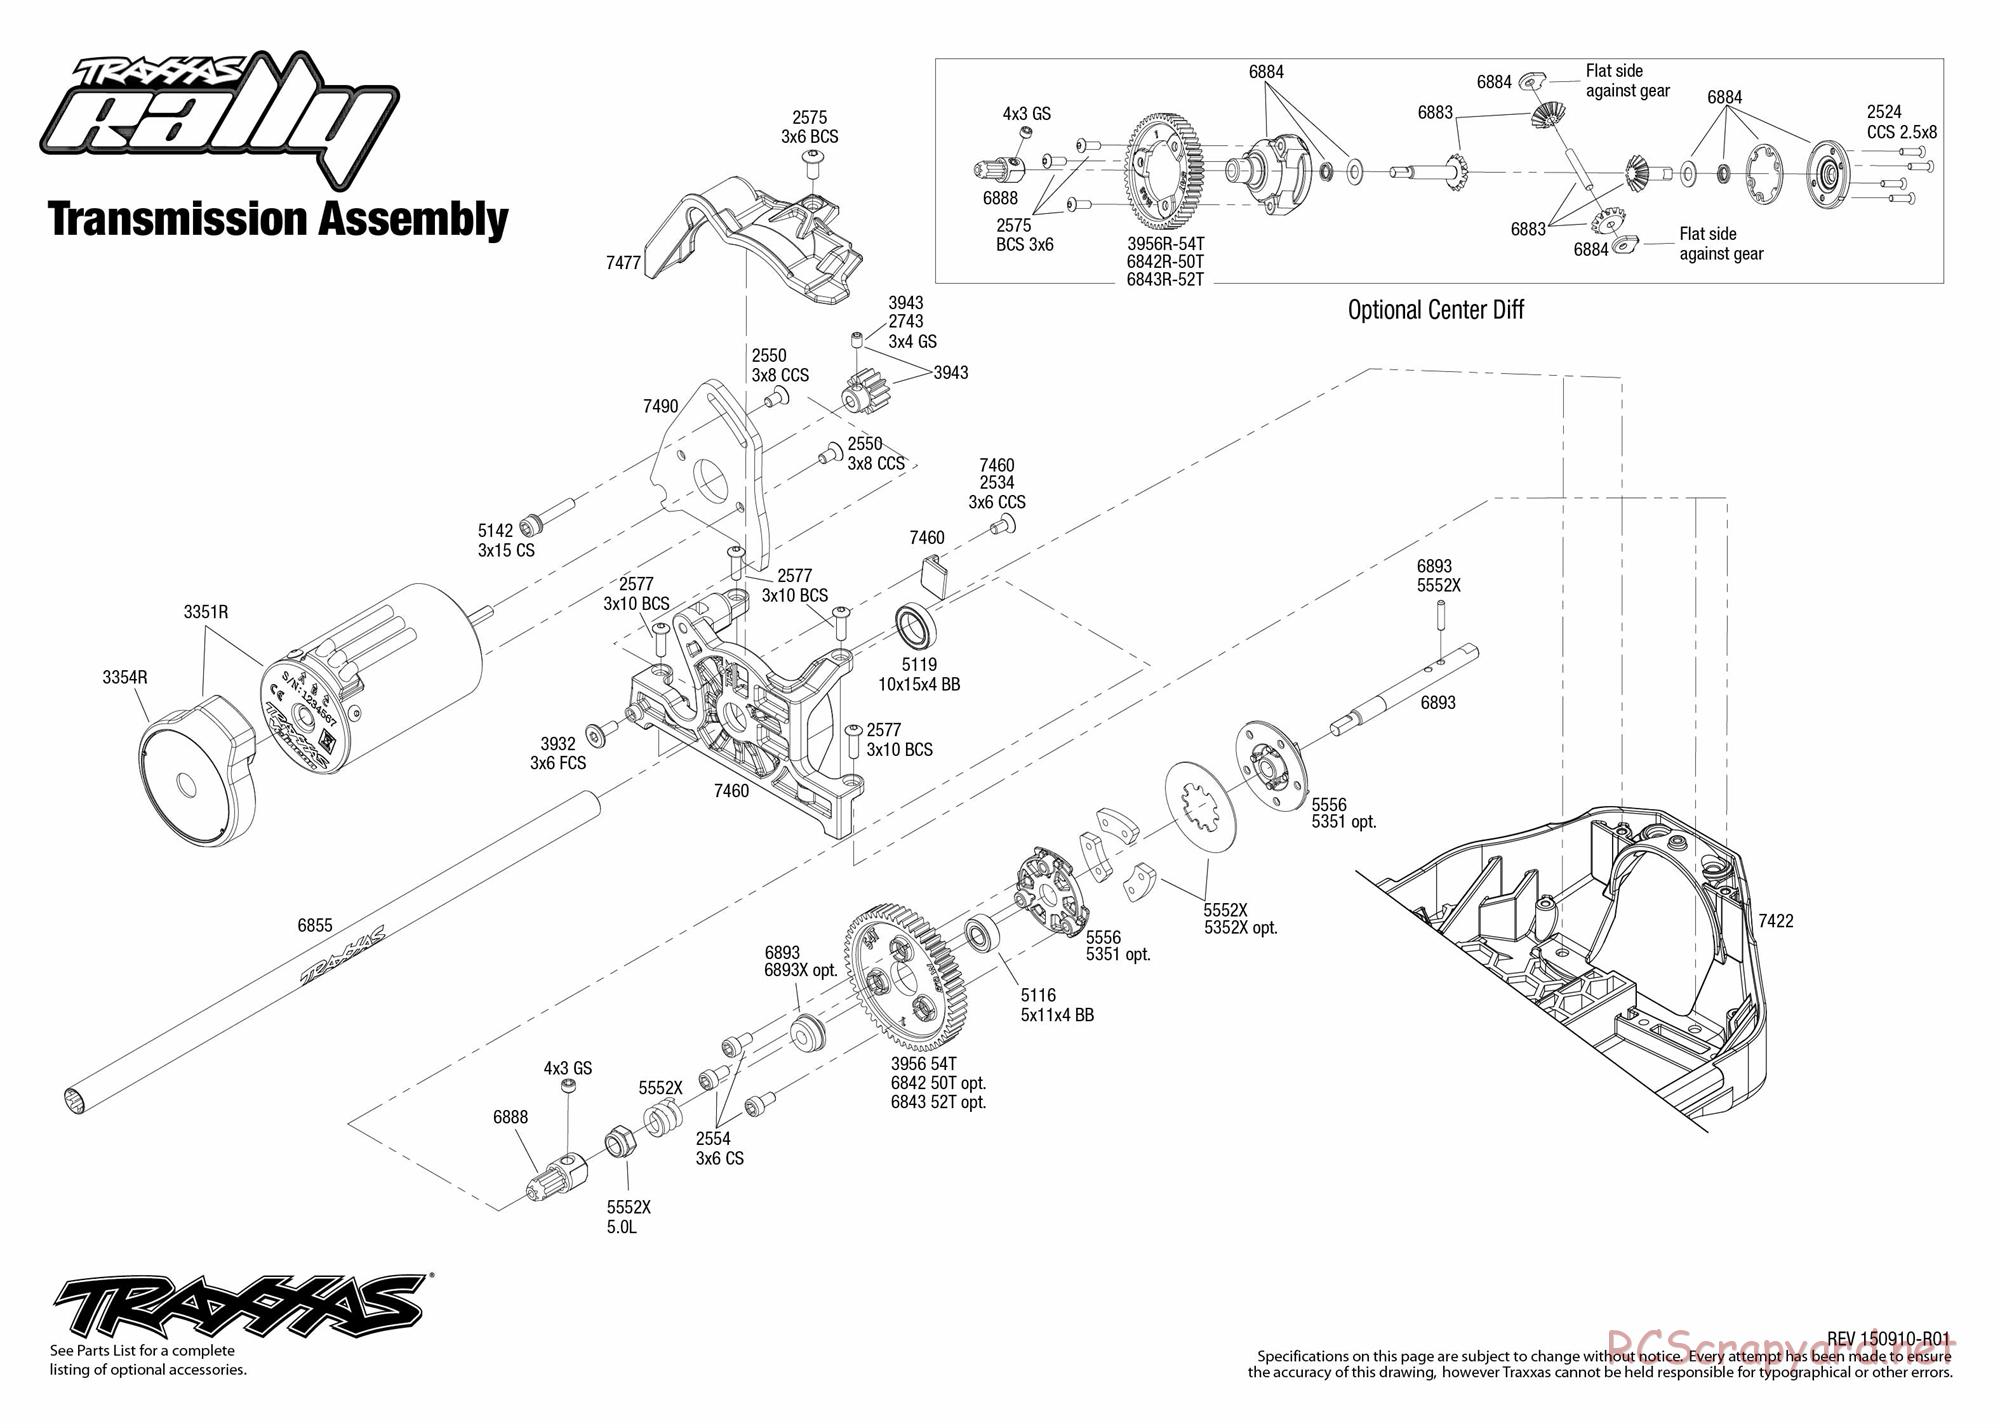 Traxxas - Rally (2015) - Exploded Views - Page 5